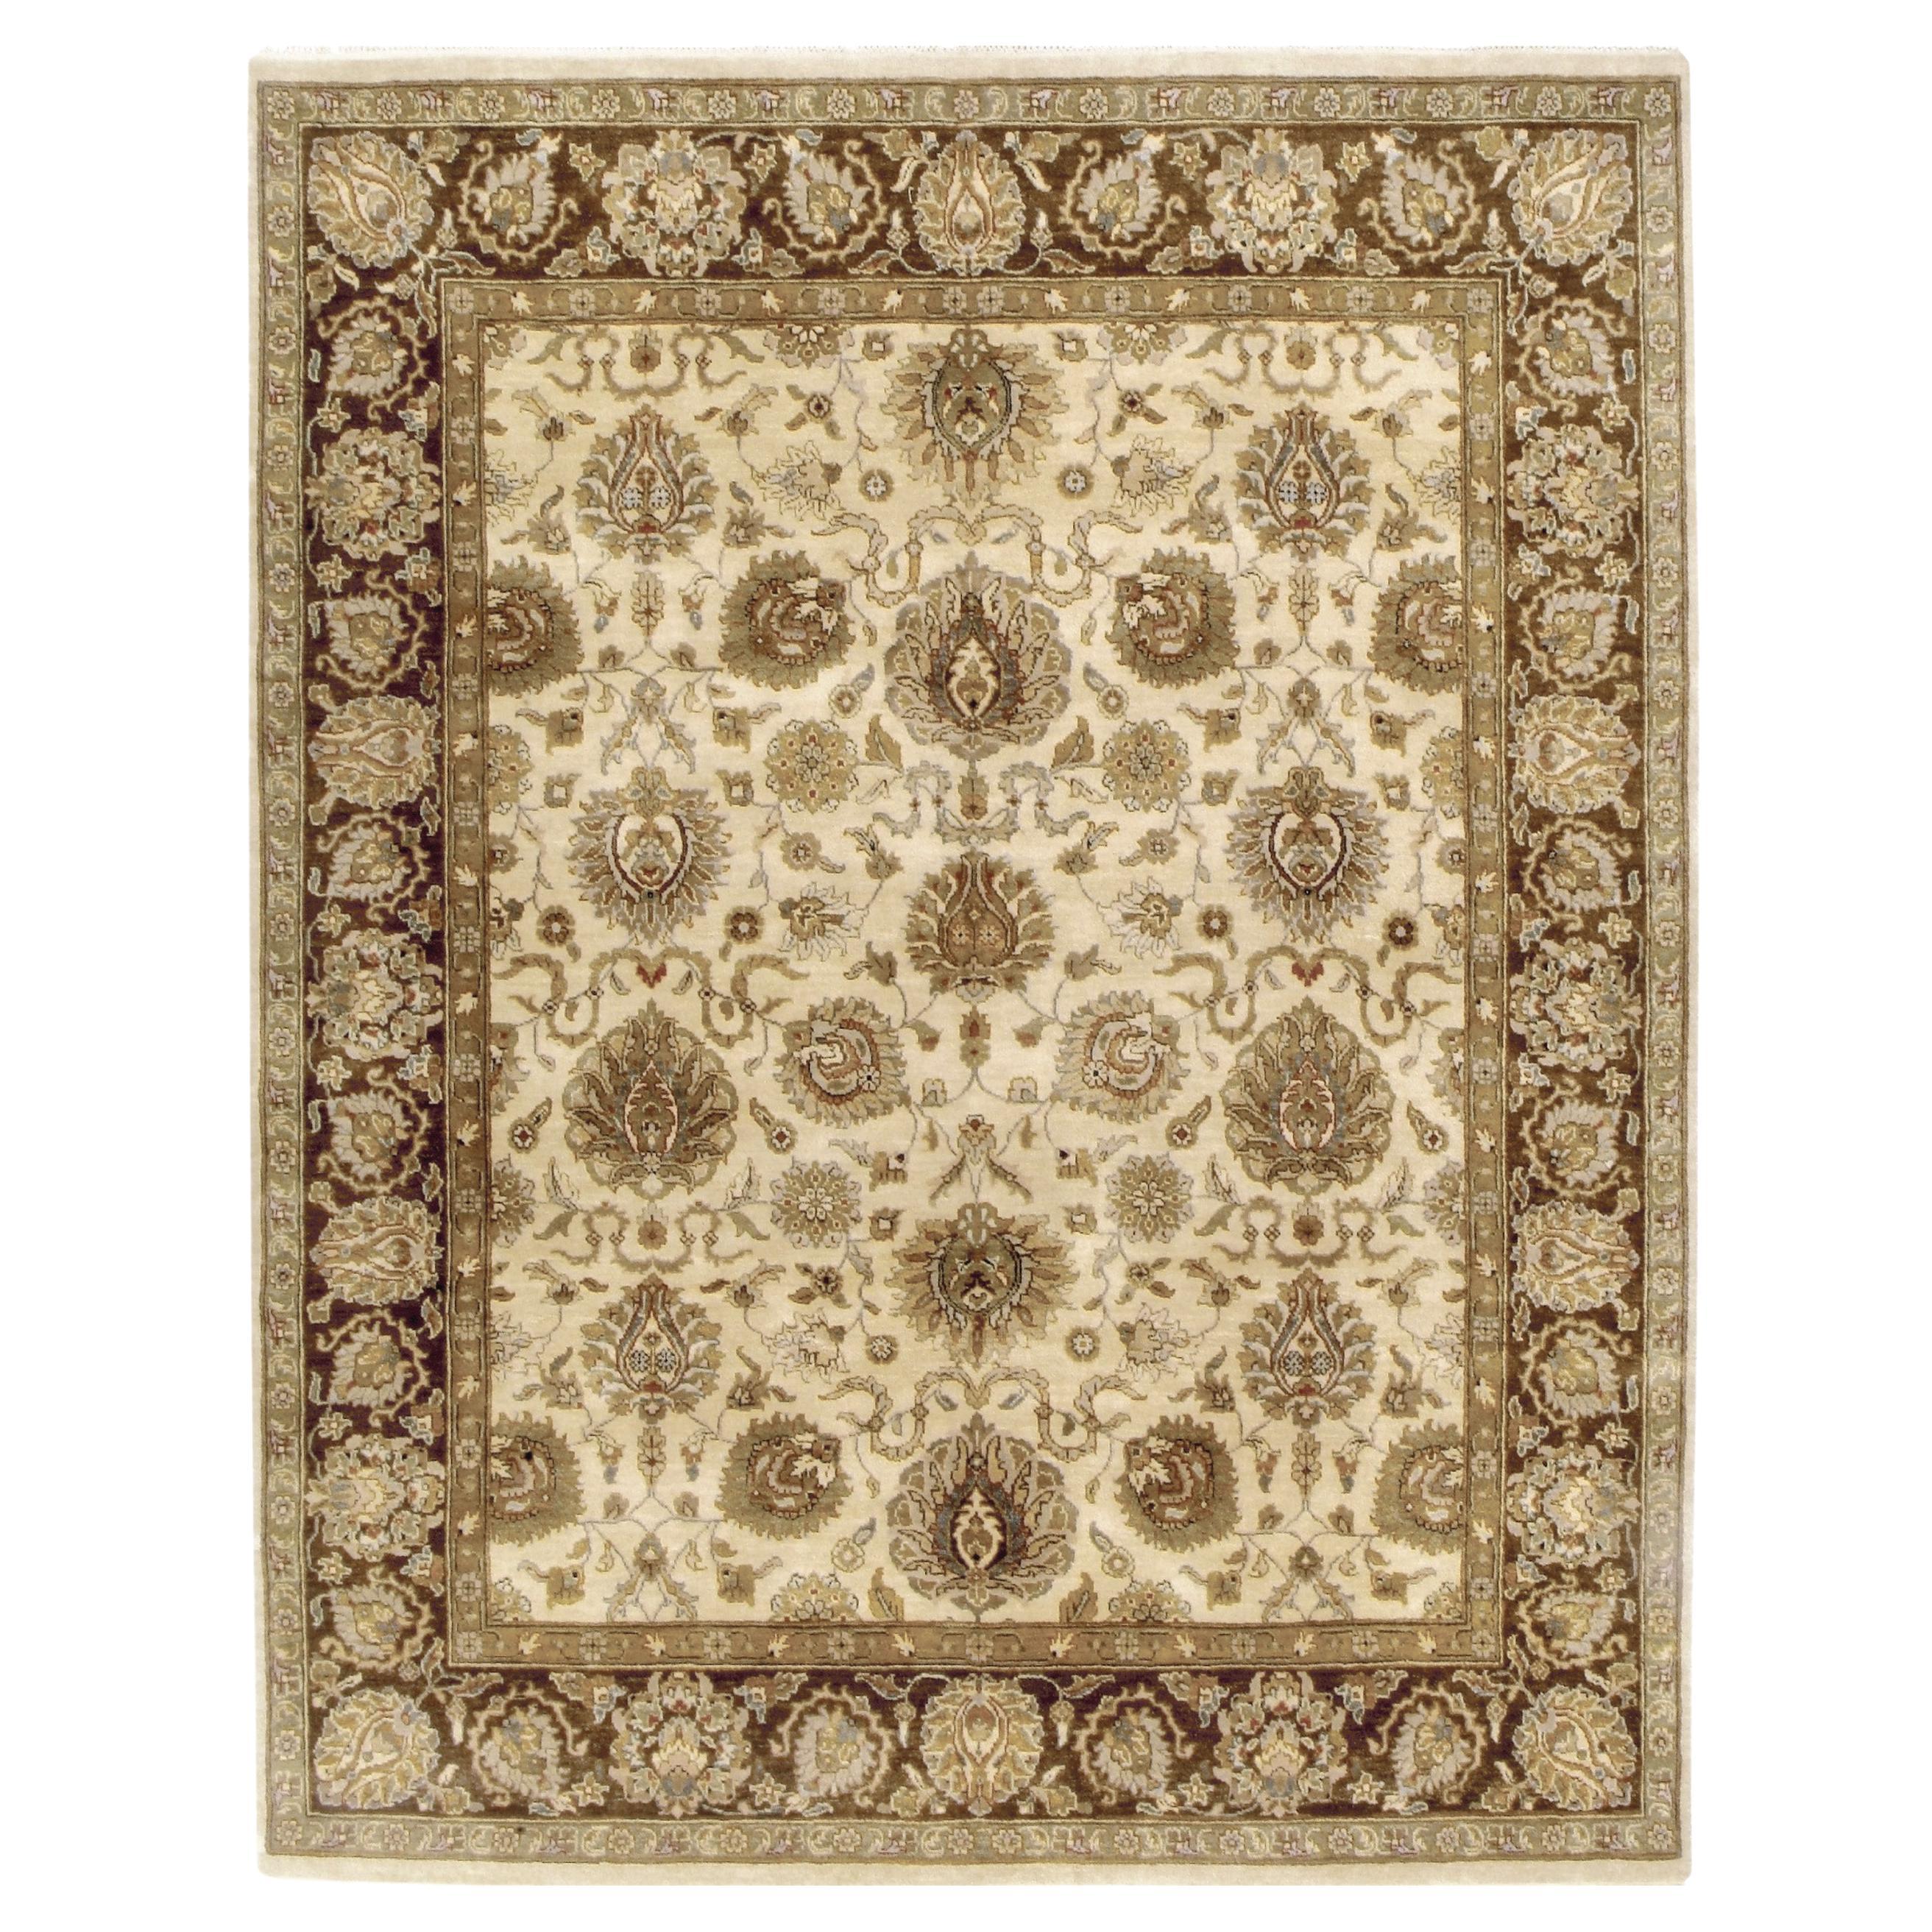 Luxury Traditional Hand-Knotted Sultanabad Cream/Brown 12X15 Rug